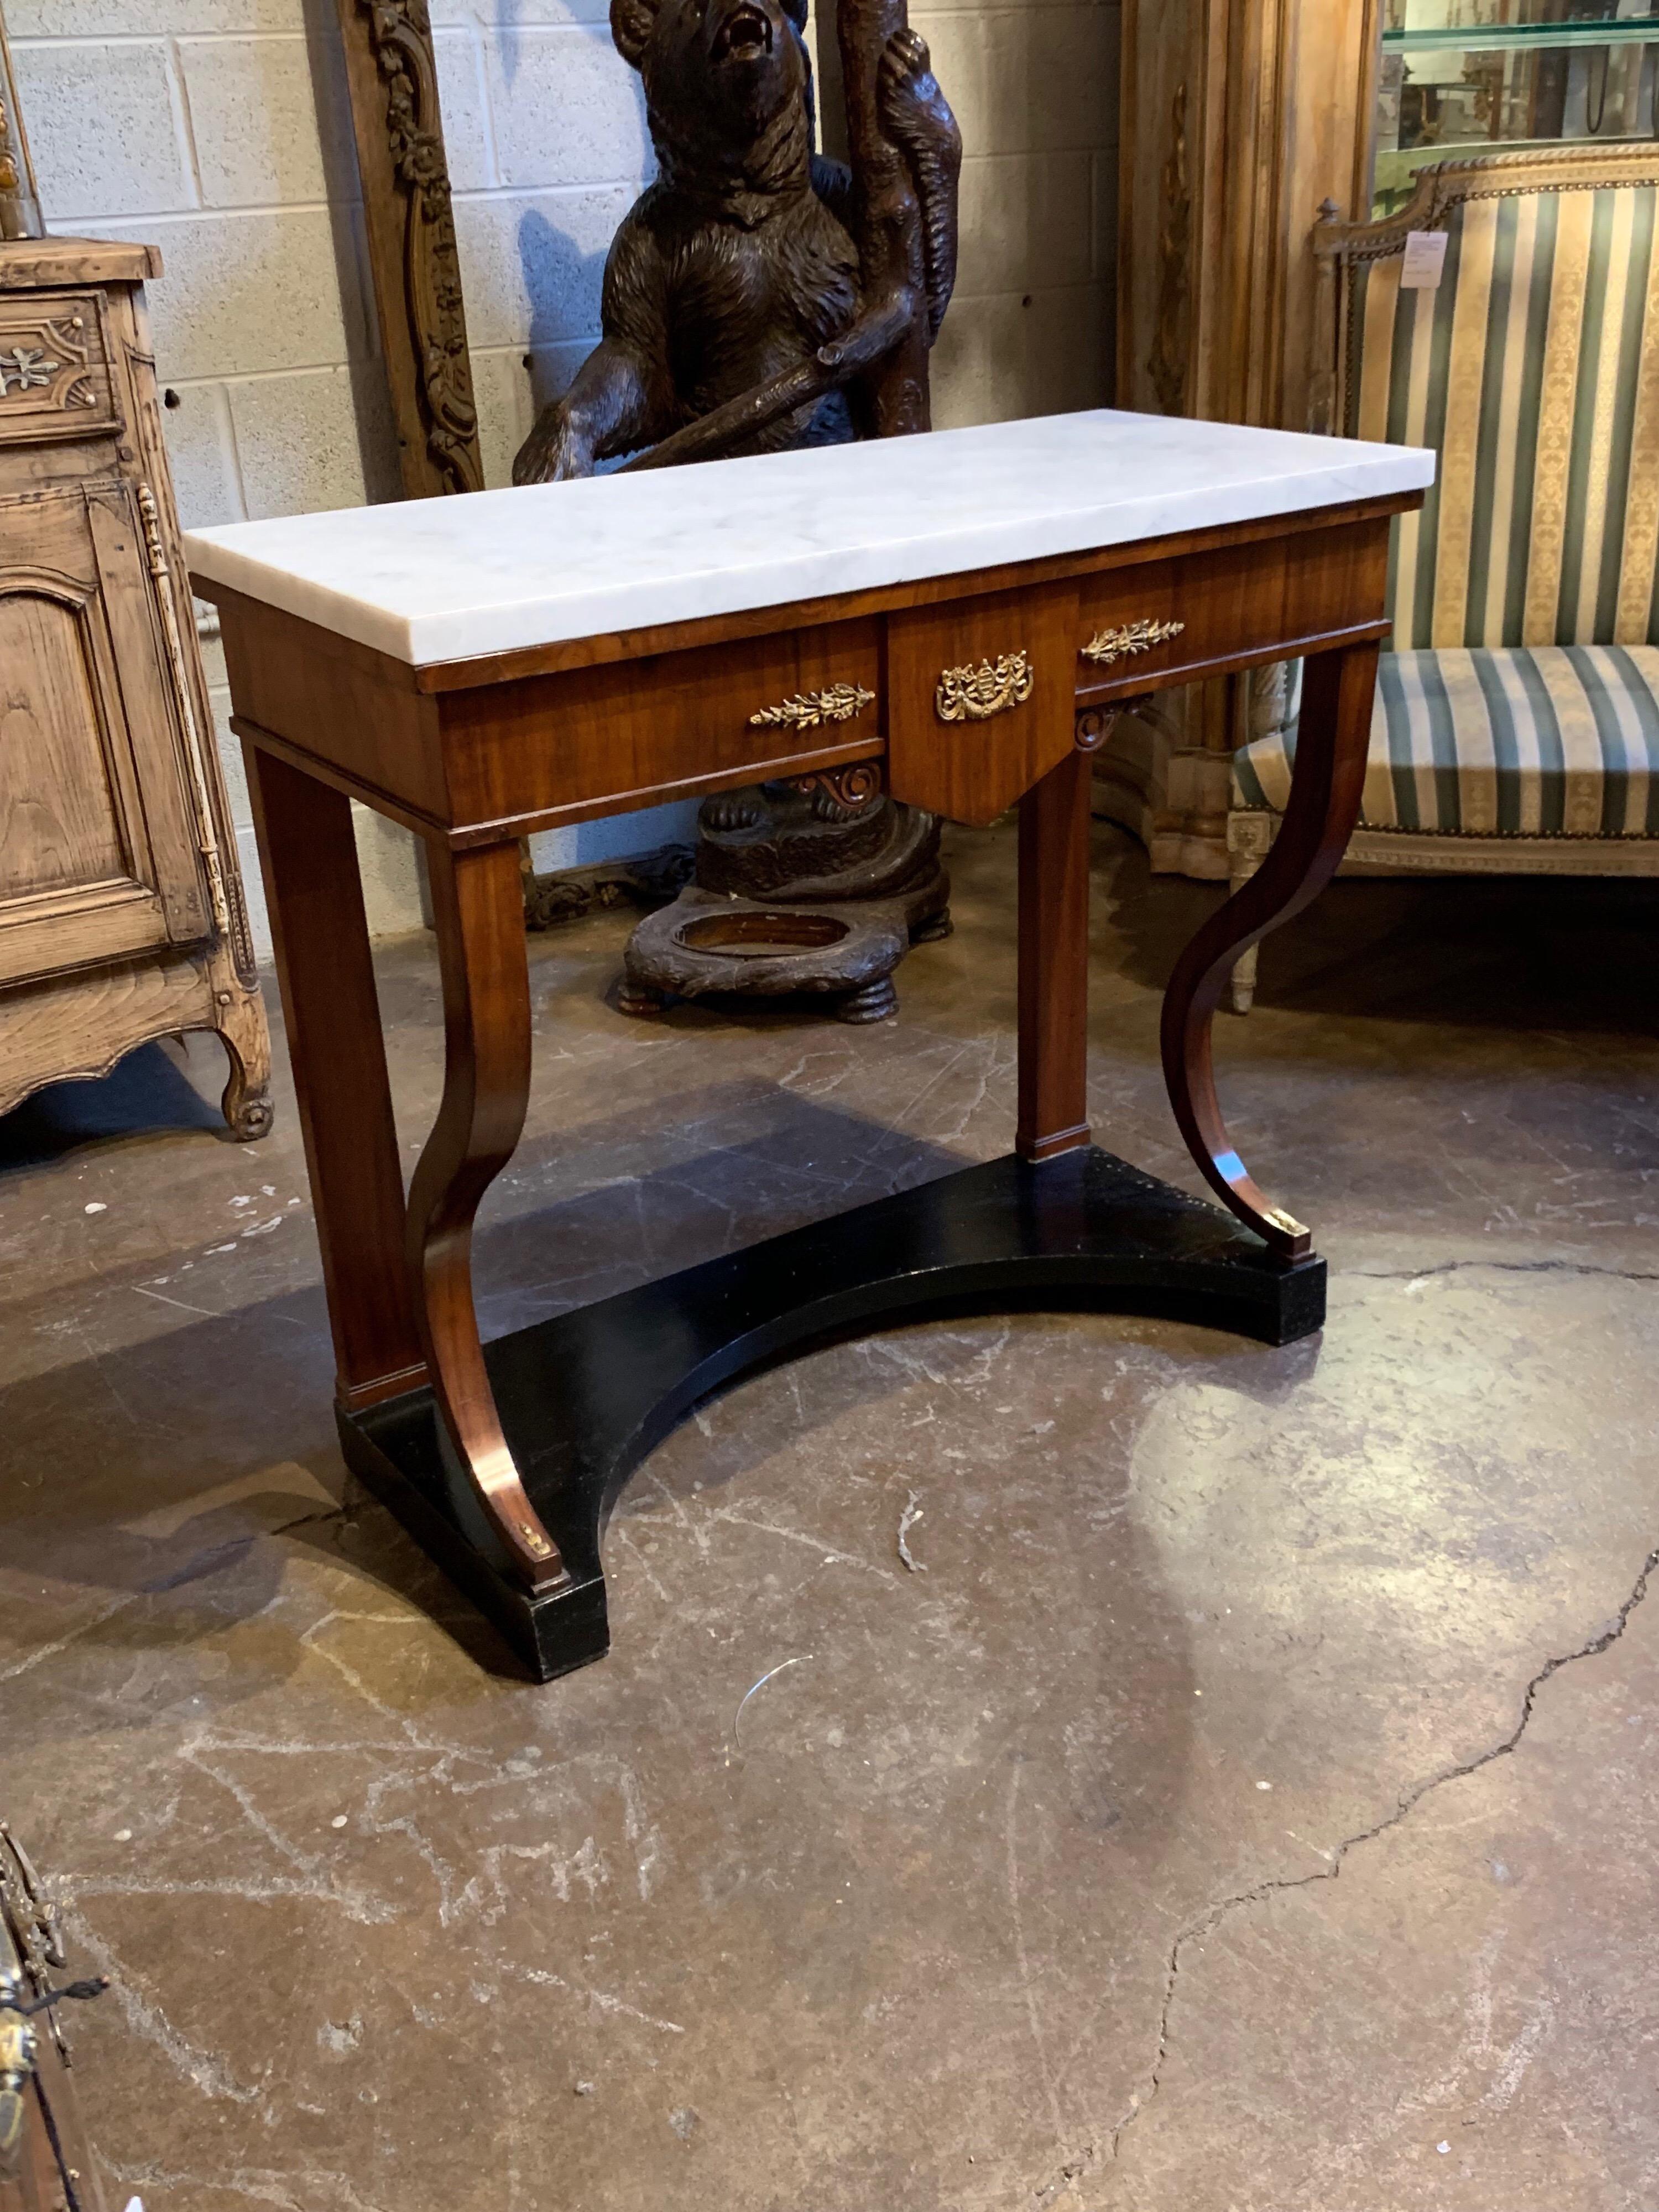 Very fine French Empire mahogany side table with ebony base. There are beautiful brass mounts on the front of the table and the top is made of carrara marble. Exquisite for an elegant home.